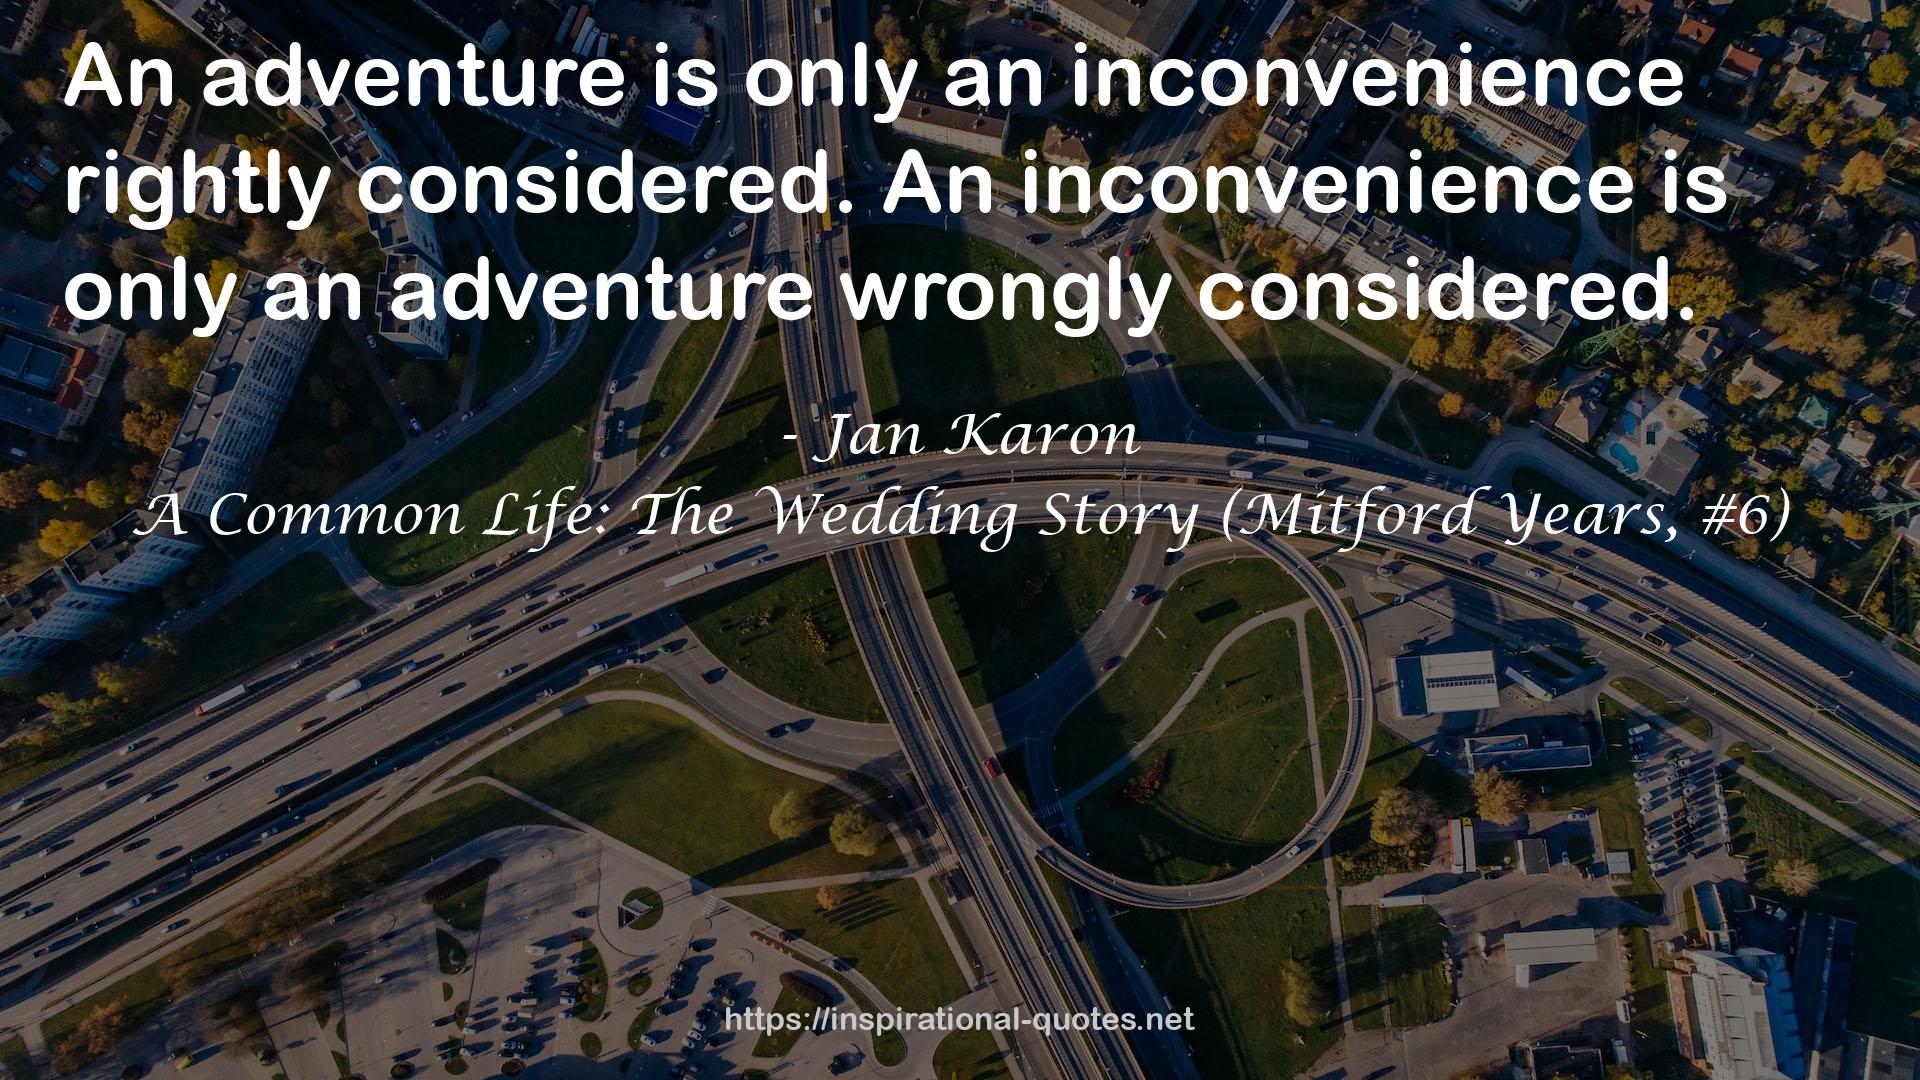 A Common Life: The Wedding Story (Mitford Years, #6) QUOTES